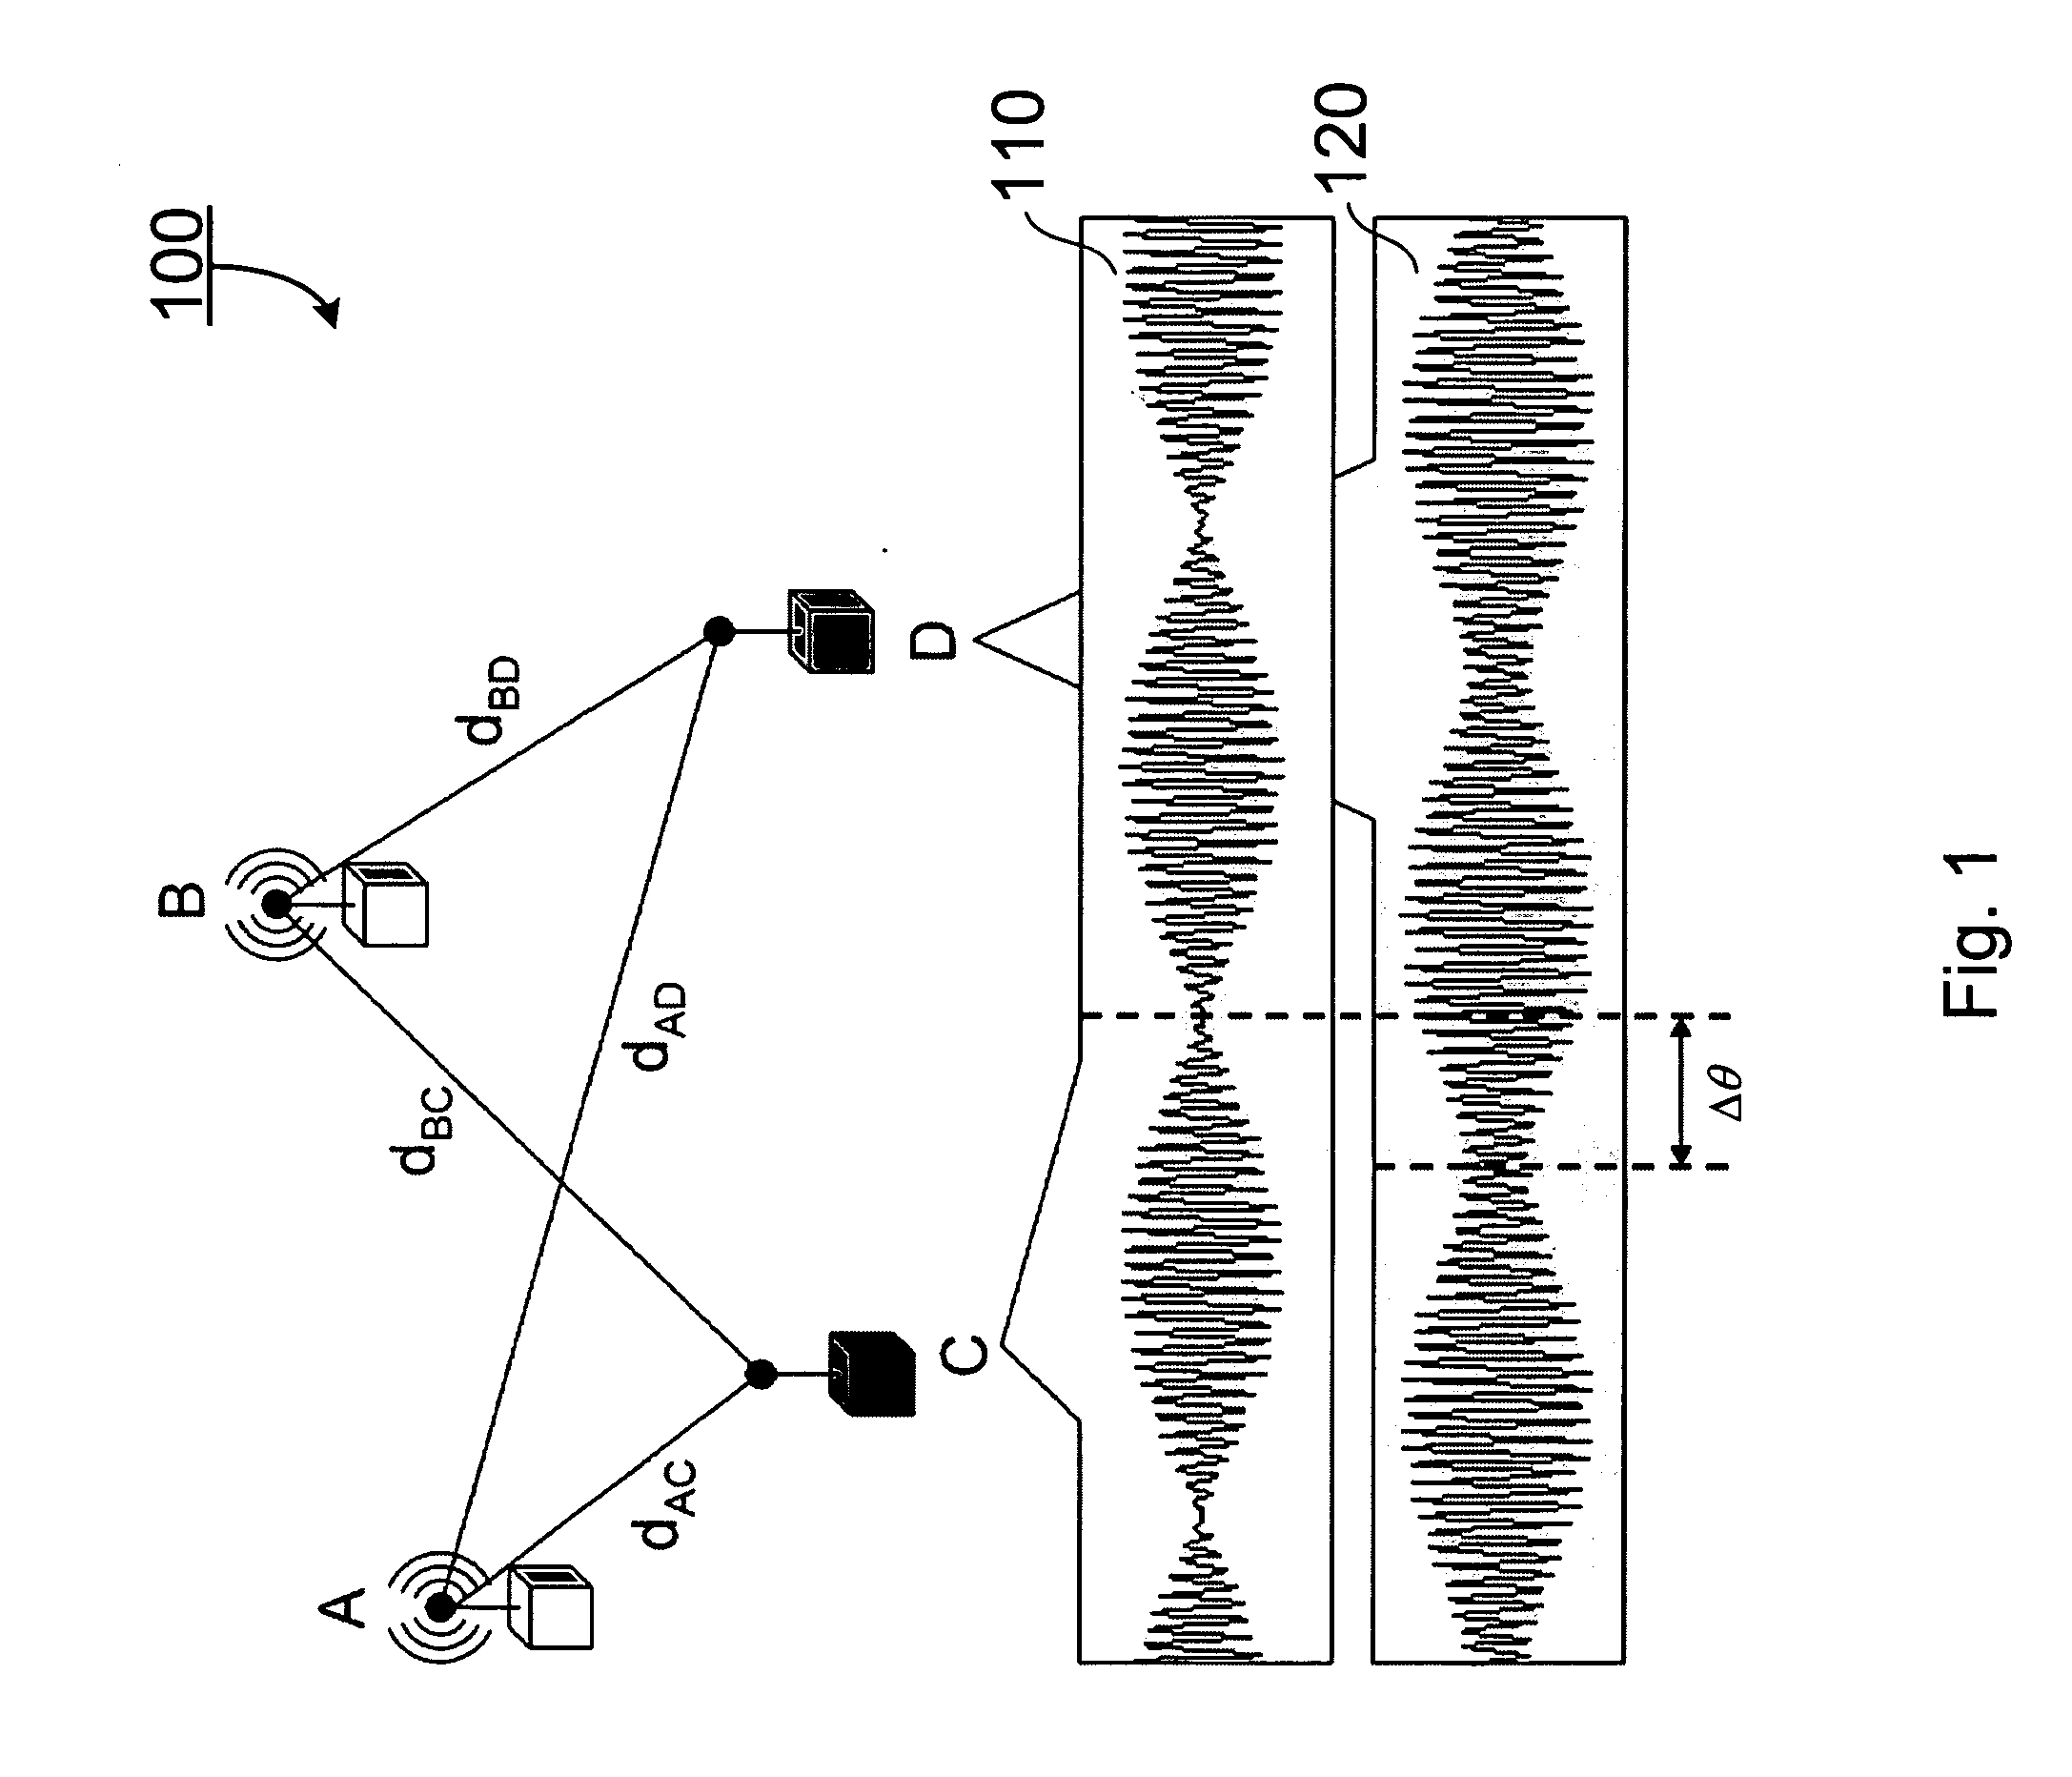 System and methods of radio interference based localization in sensor networks